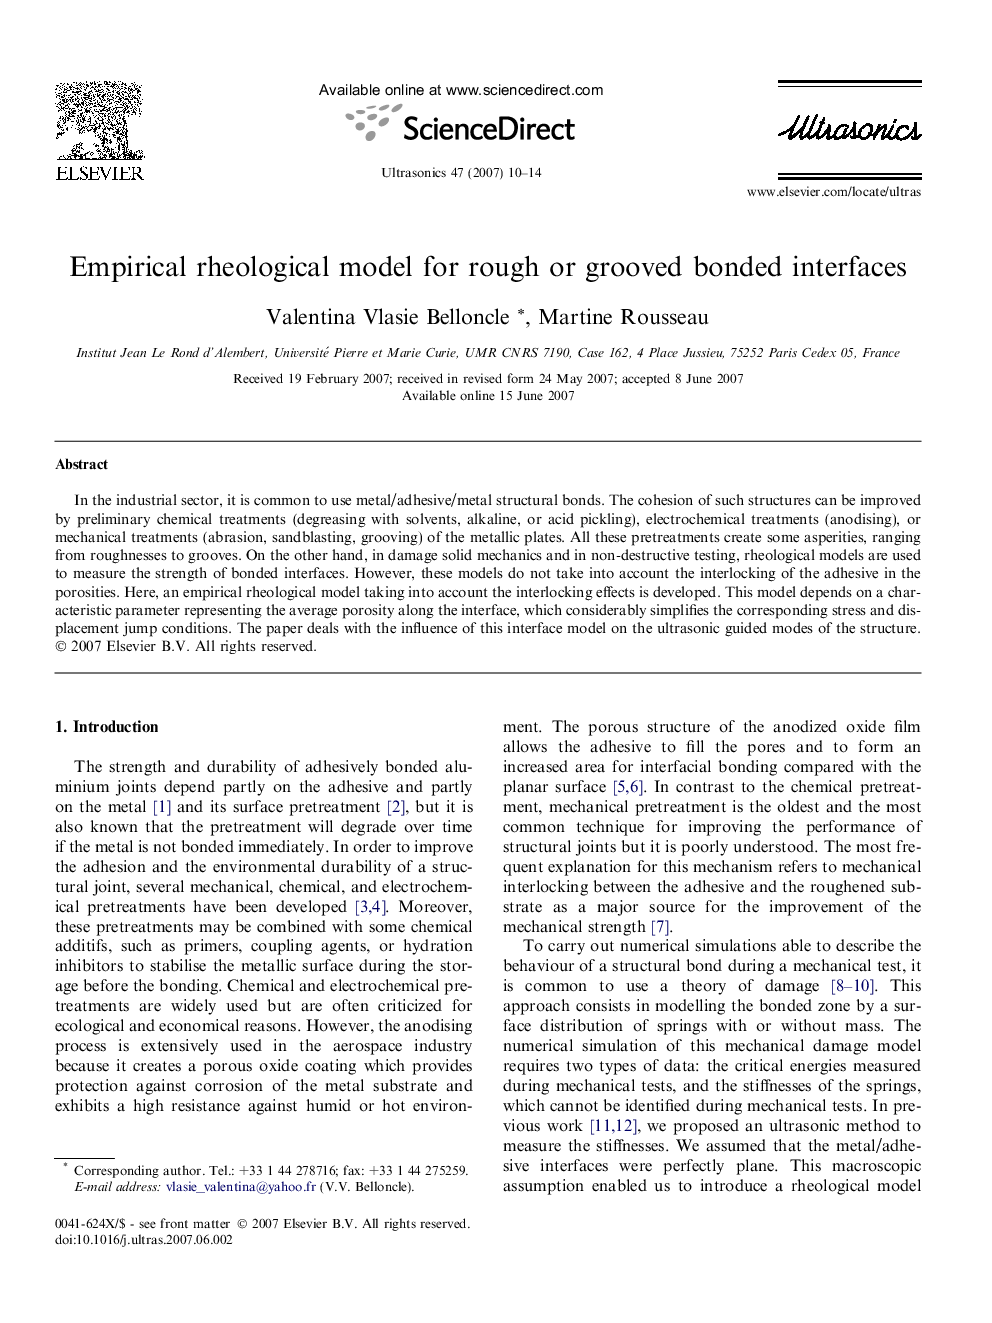 Empirical rheological model for rough or grooved bonded interfaces